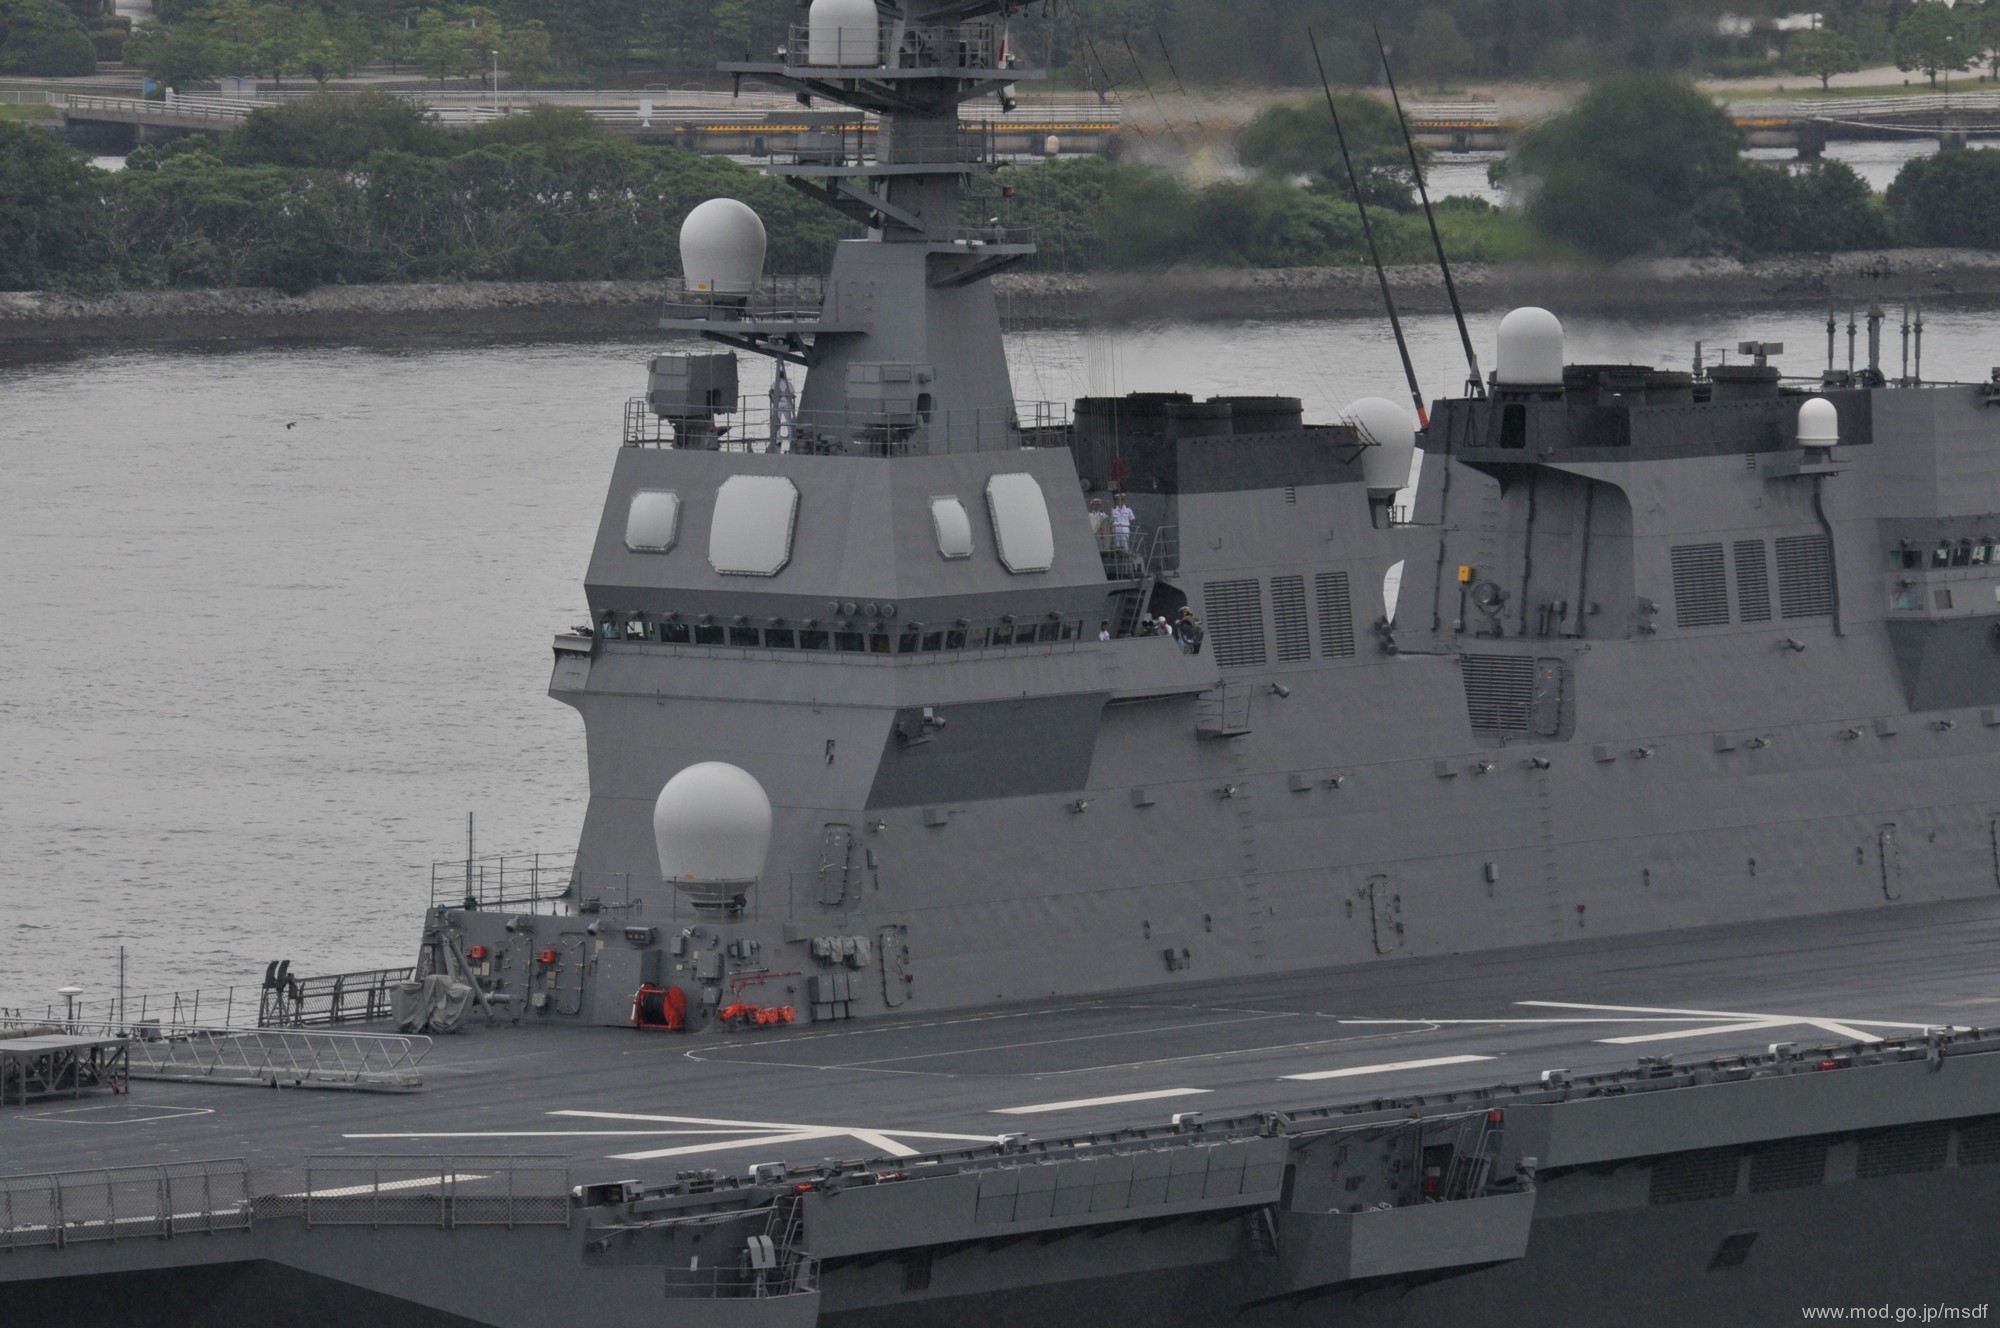 ddh-182 jds ise hyuga class helicopter destroyer japan maritime self defense force jmsdf 10